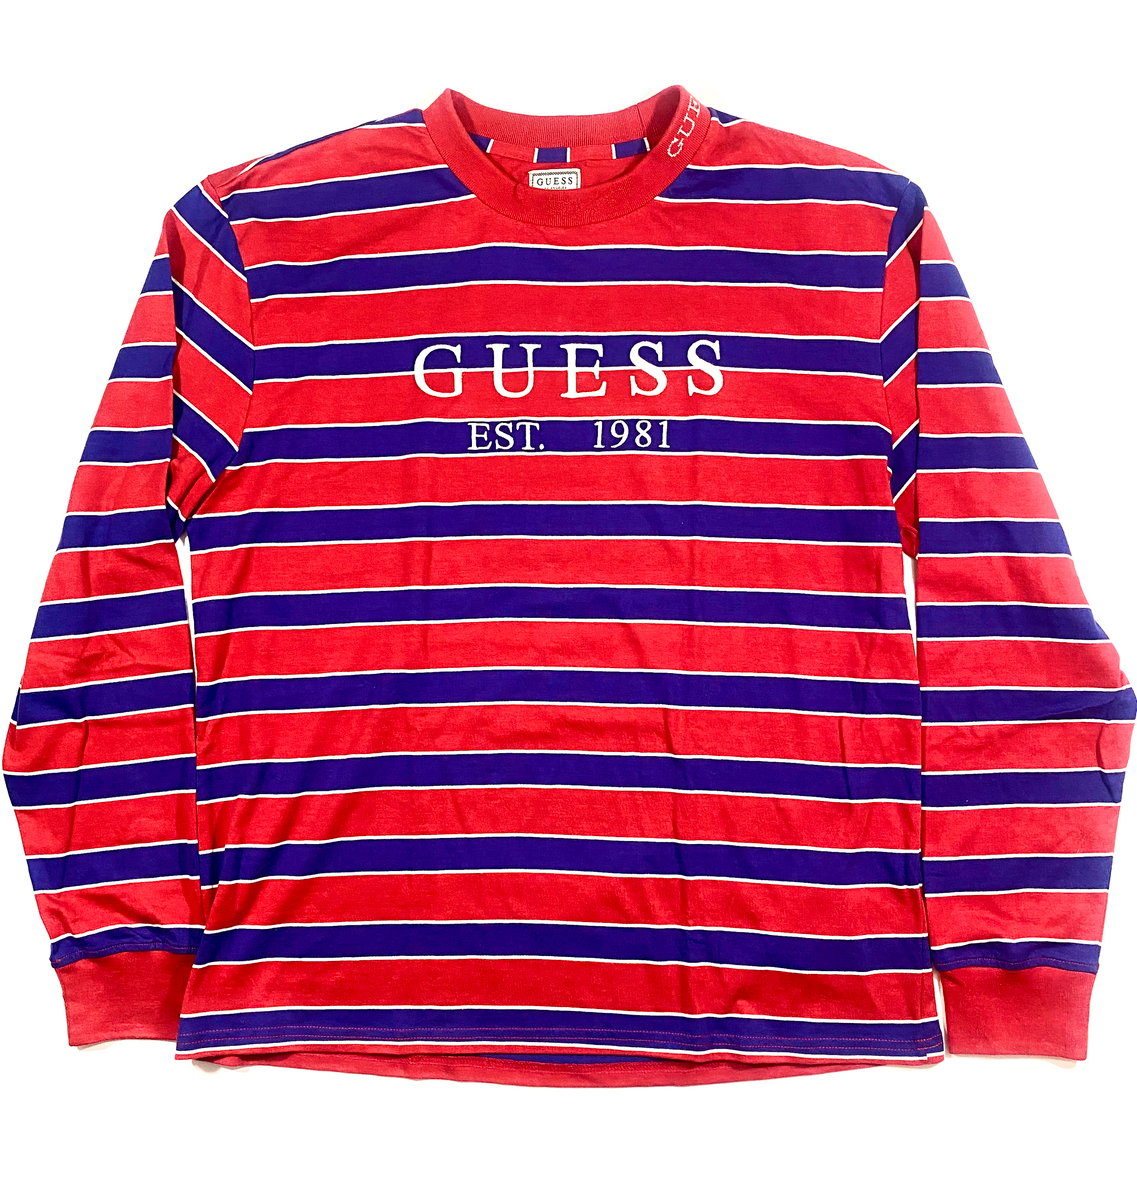 (L) Guess Long Sleeve Shirt | Back to Life Vintage